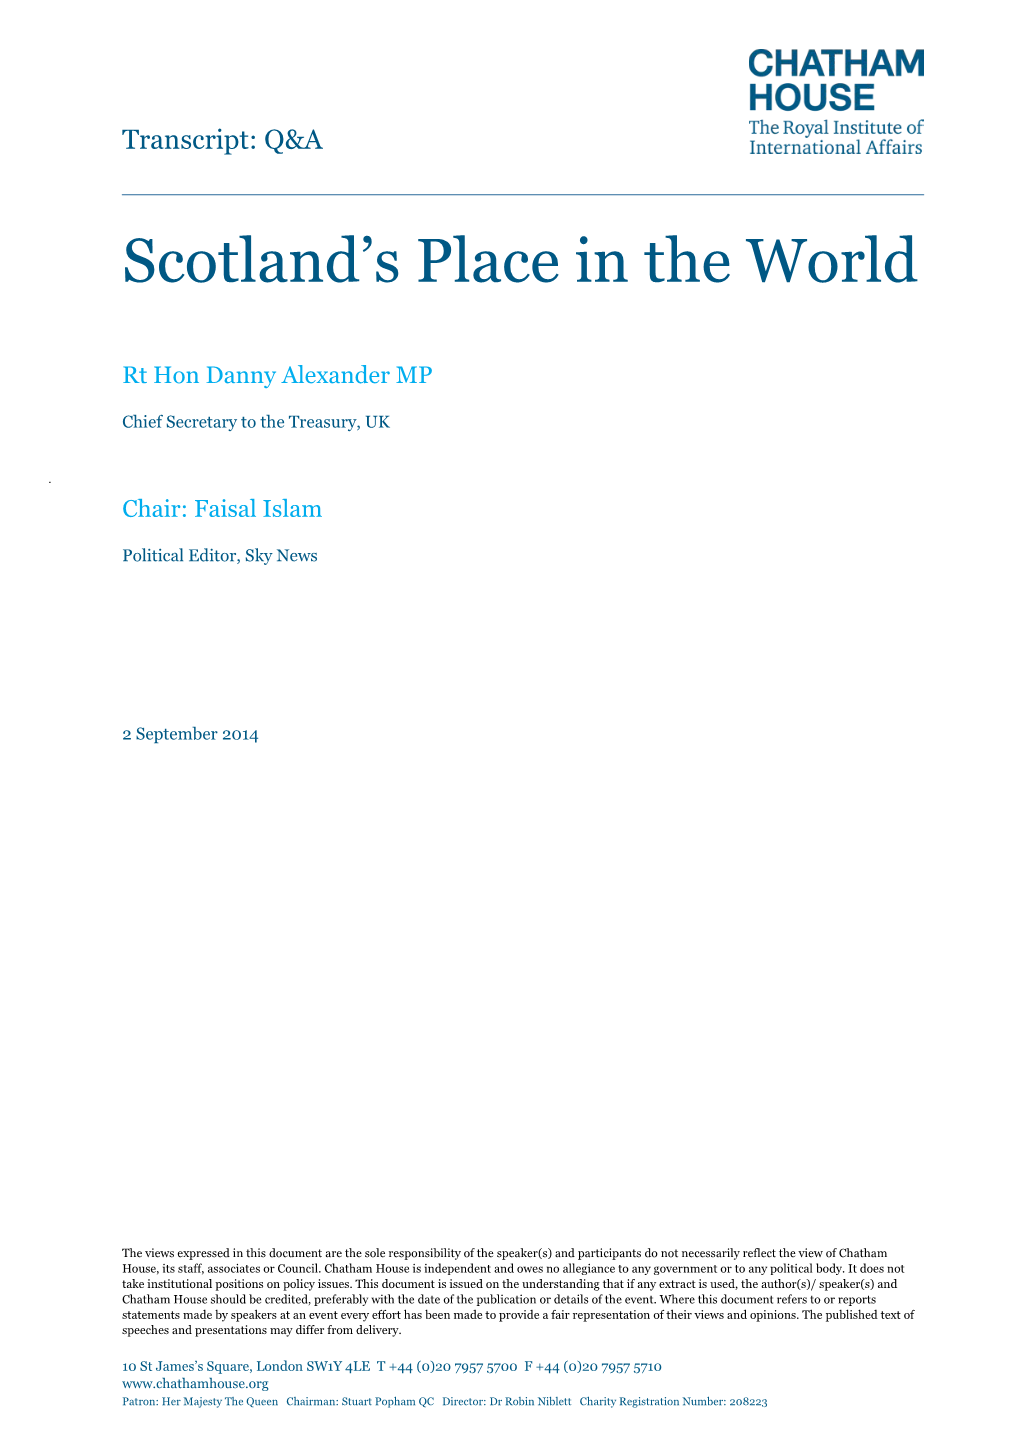 Scotland's Place in the World